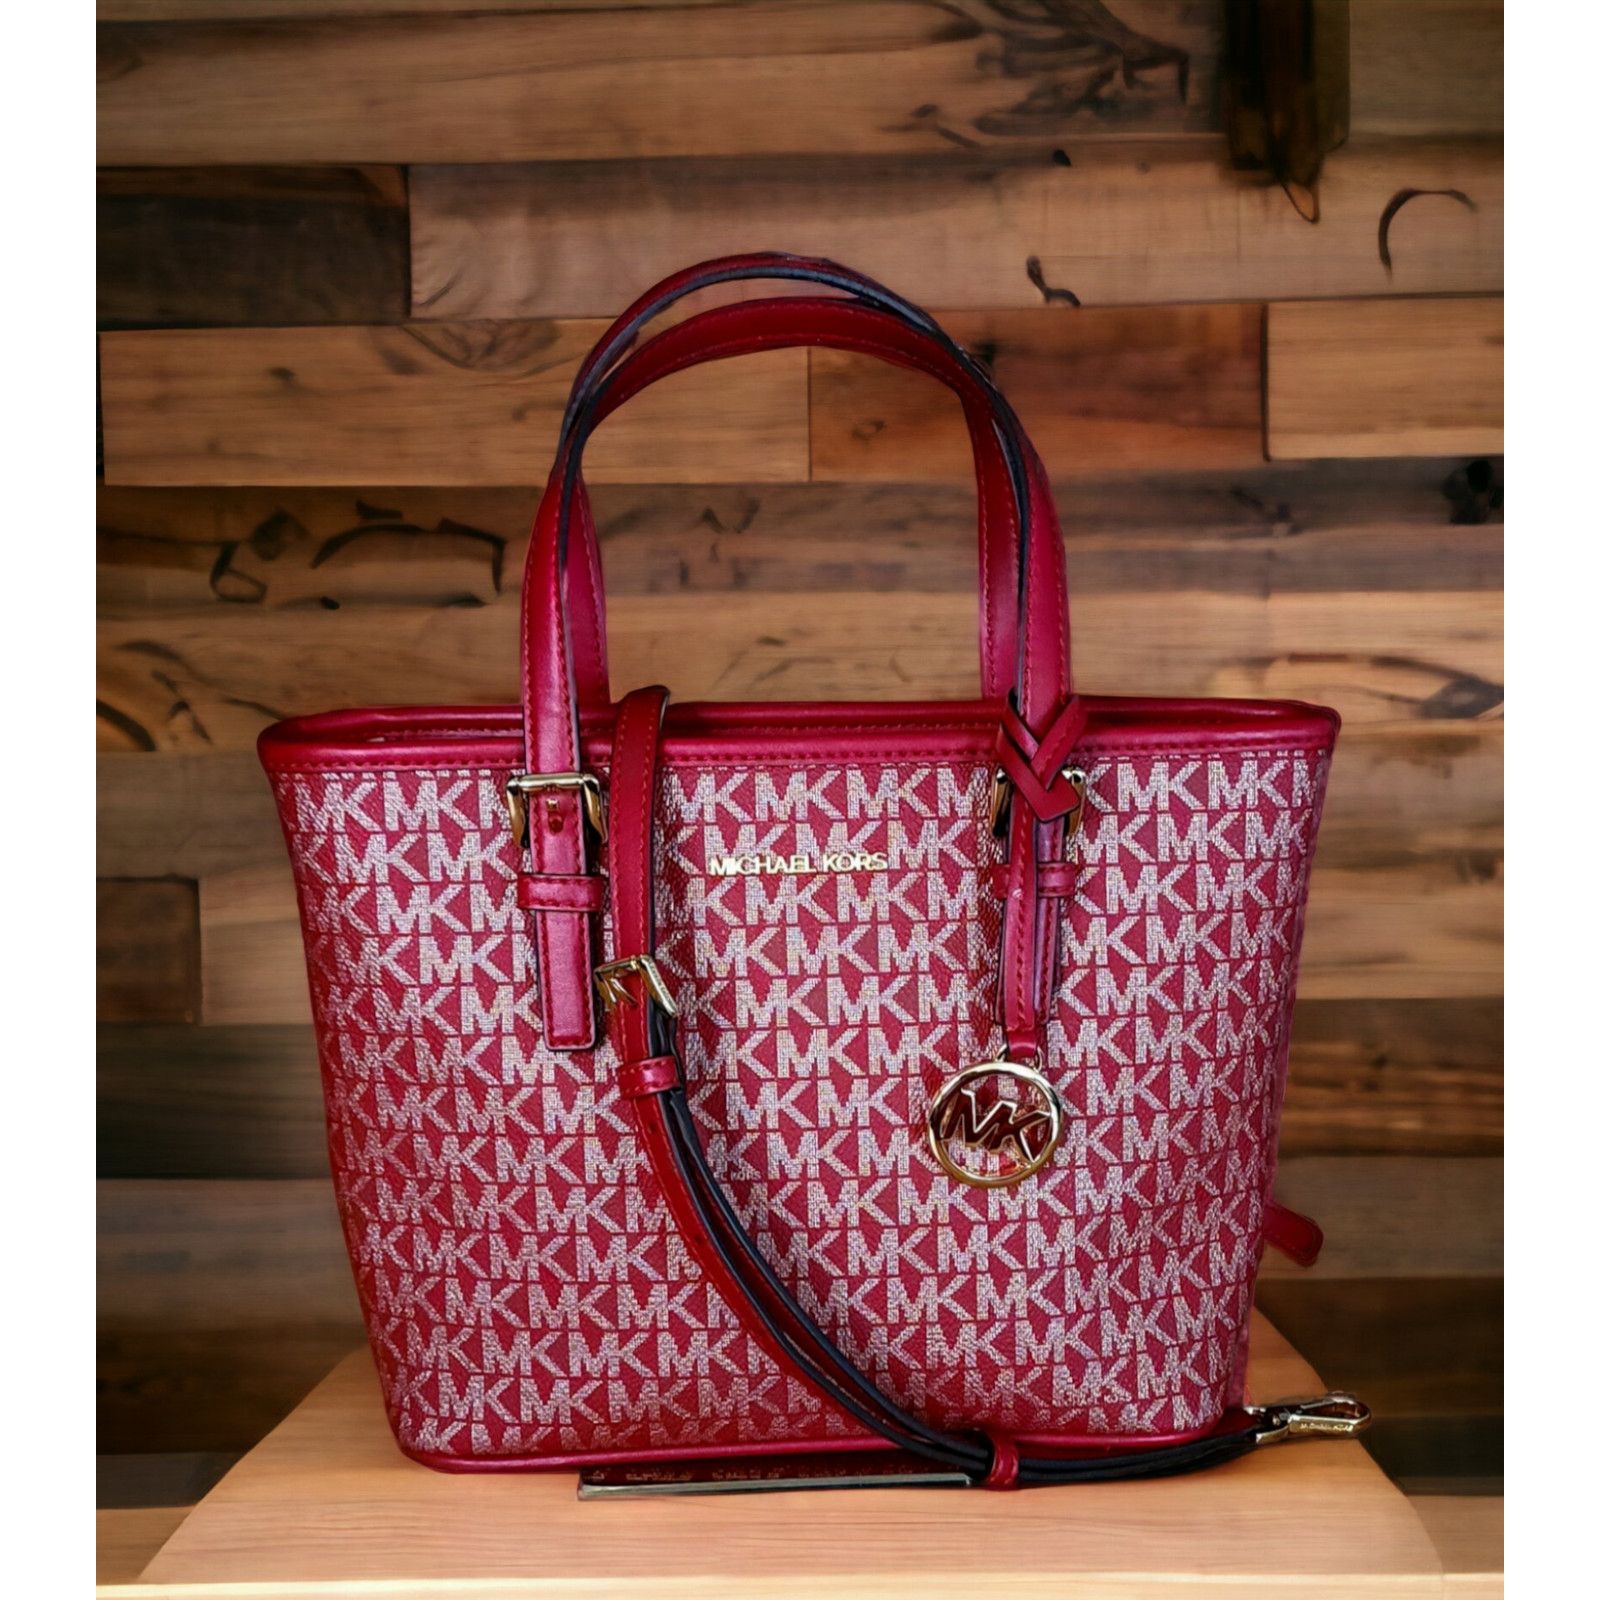 MICHAEL KORS - Jet Set Travel Extra-Small Logo Top-Zip Tote Bag ONLY $99 -  The Freebie Guy®